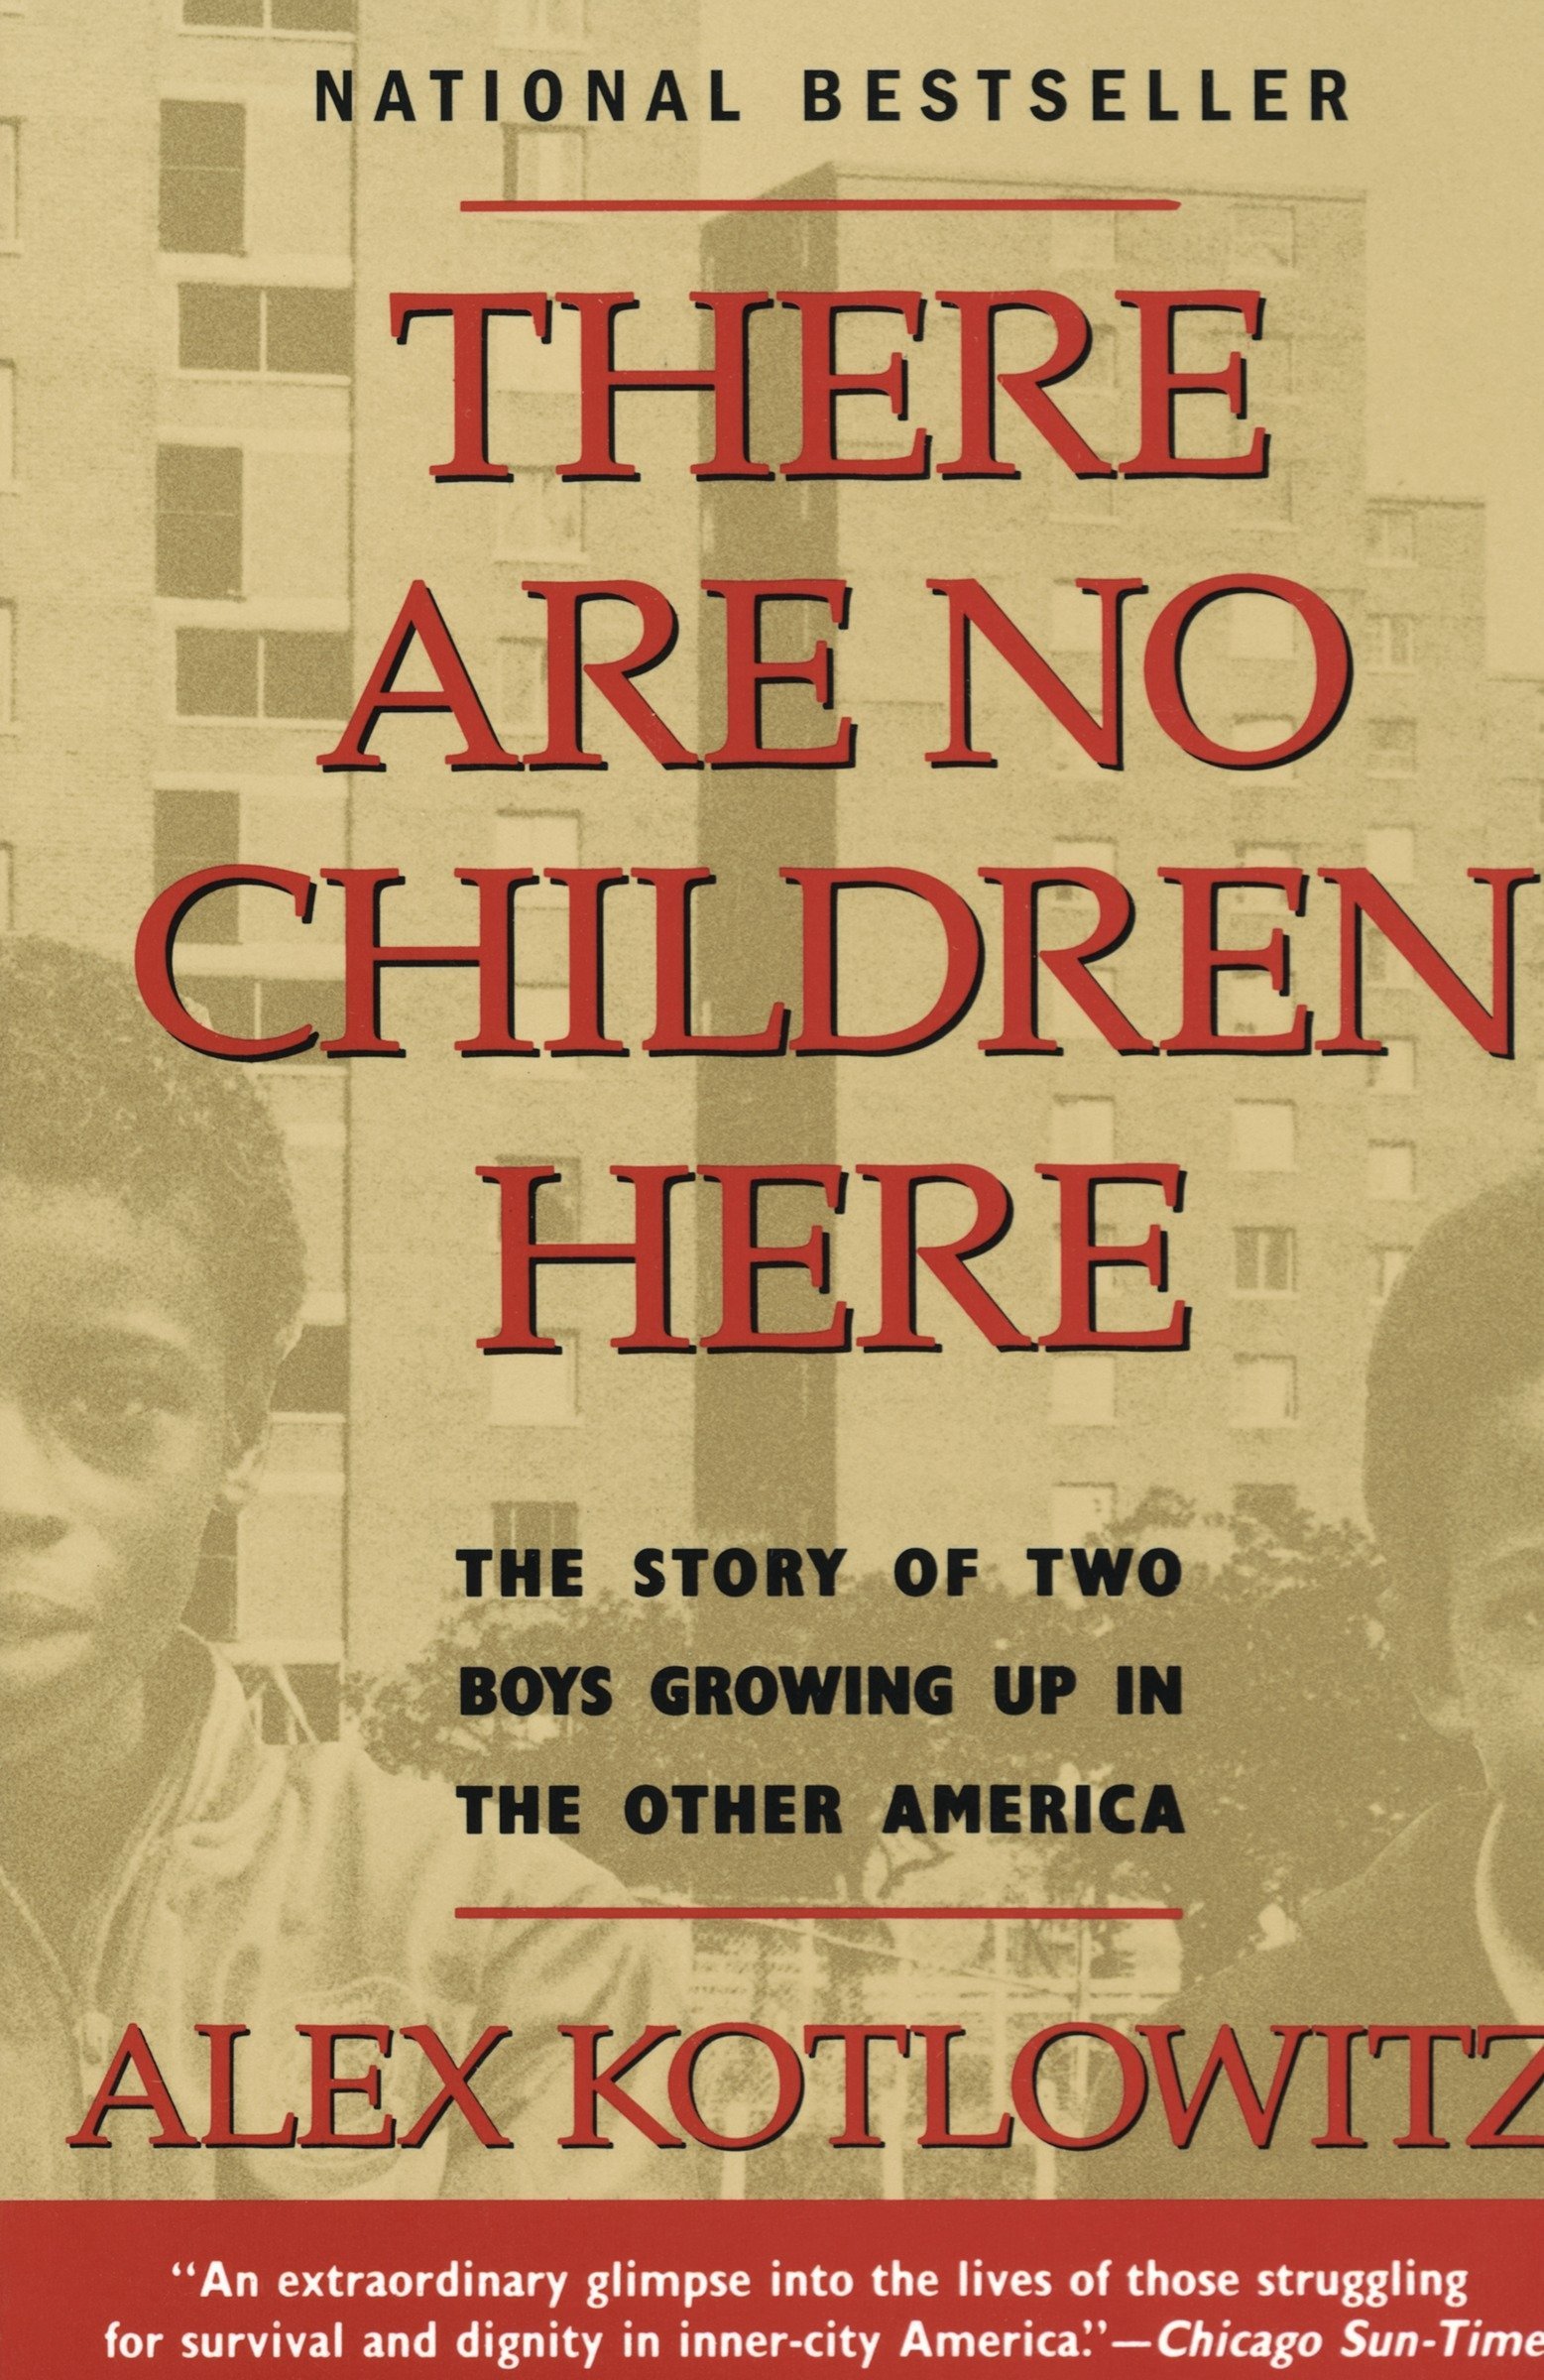 Cover of "There Are No Children Here" by Alex Kotlowitz.